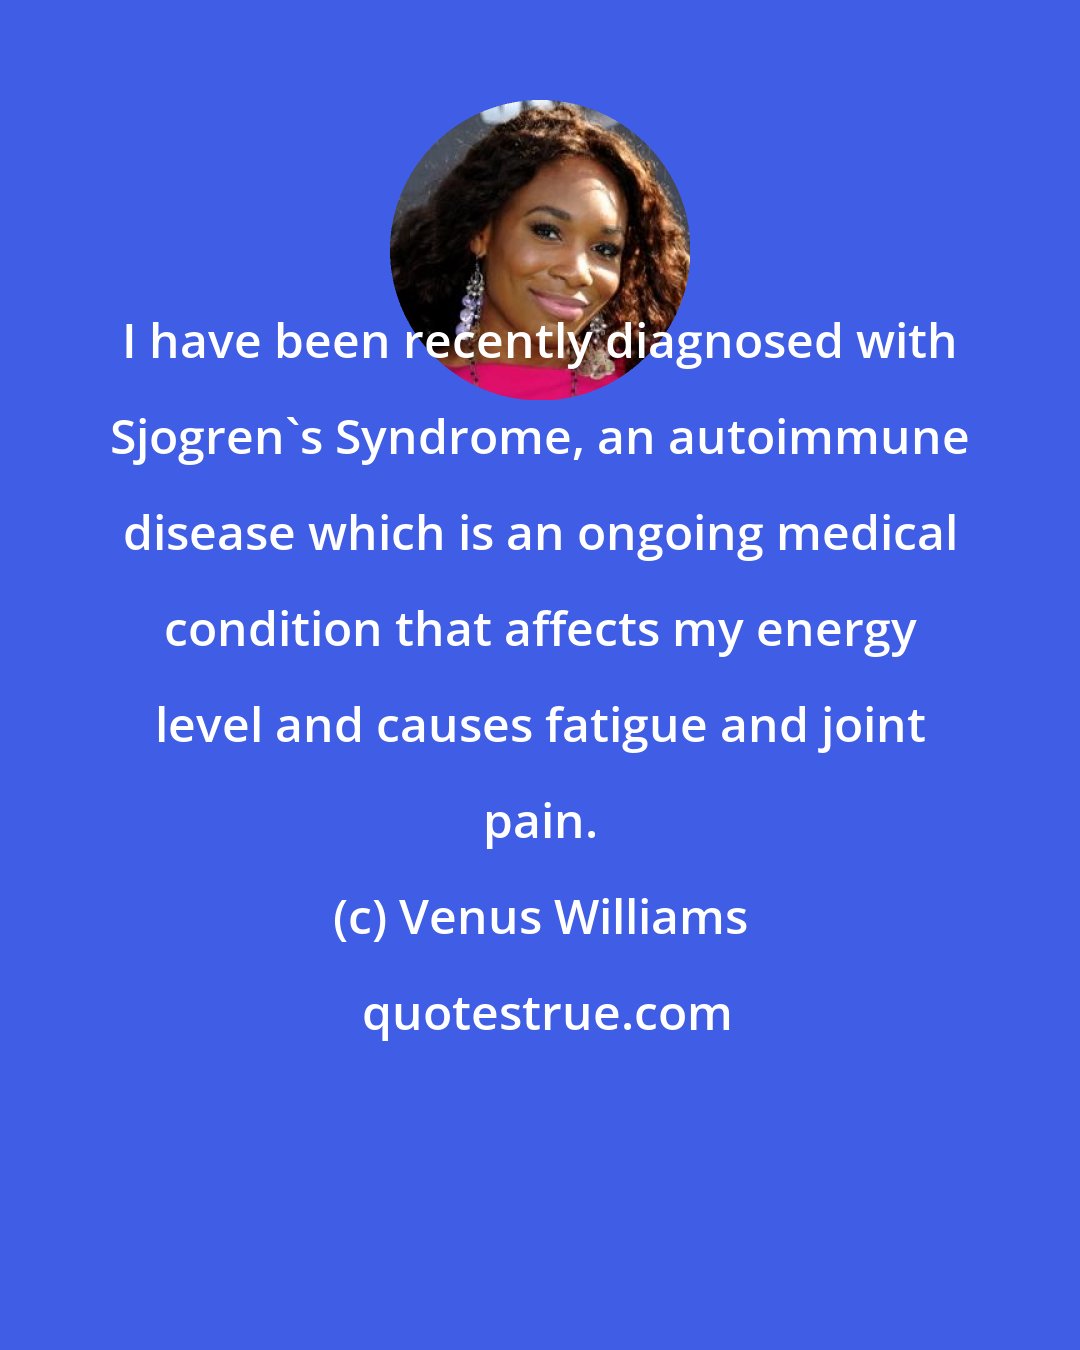 Venus Williams: I have been recently diagnosed with Sjogren's Syndrome, an autoimmune disease which is an ongoing medical condition that affects my energy level and causes fatigue and joint pain.